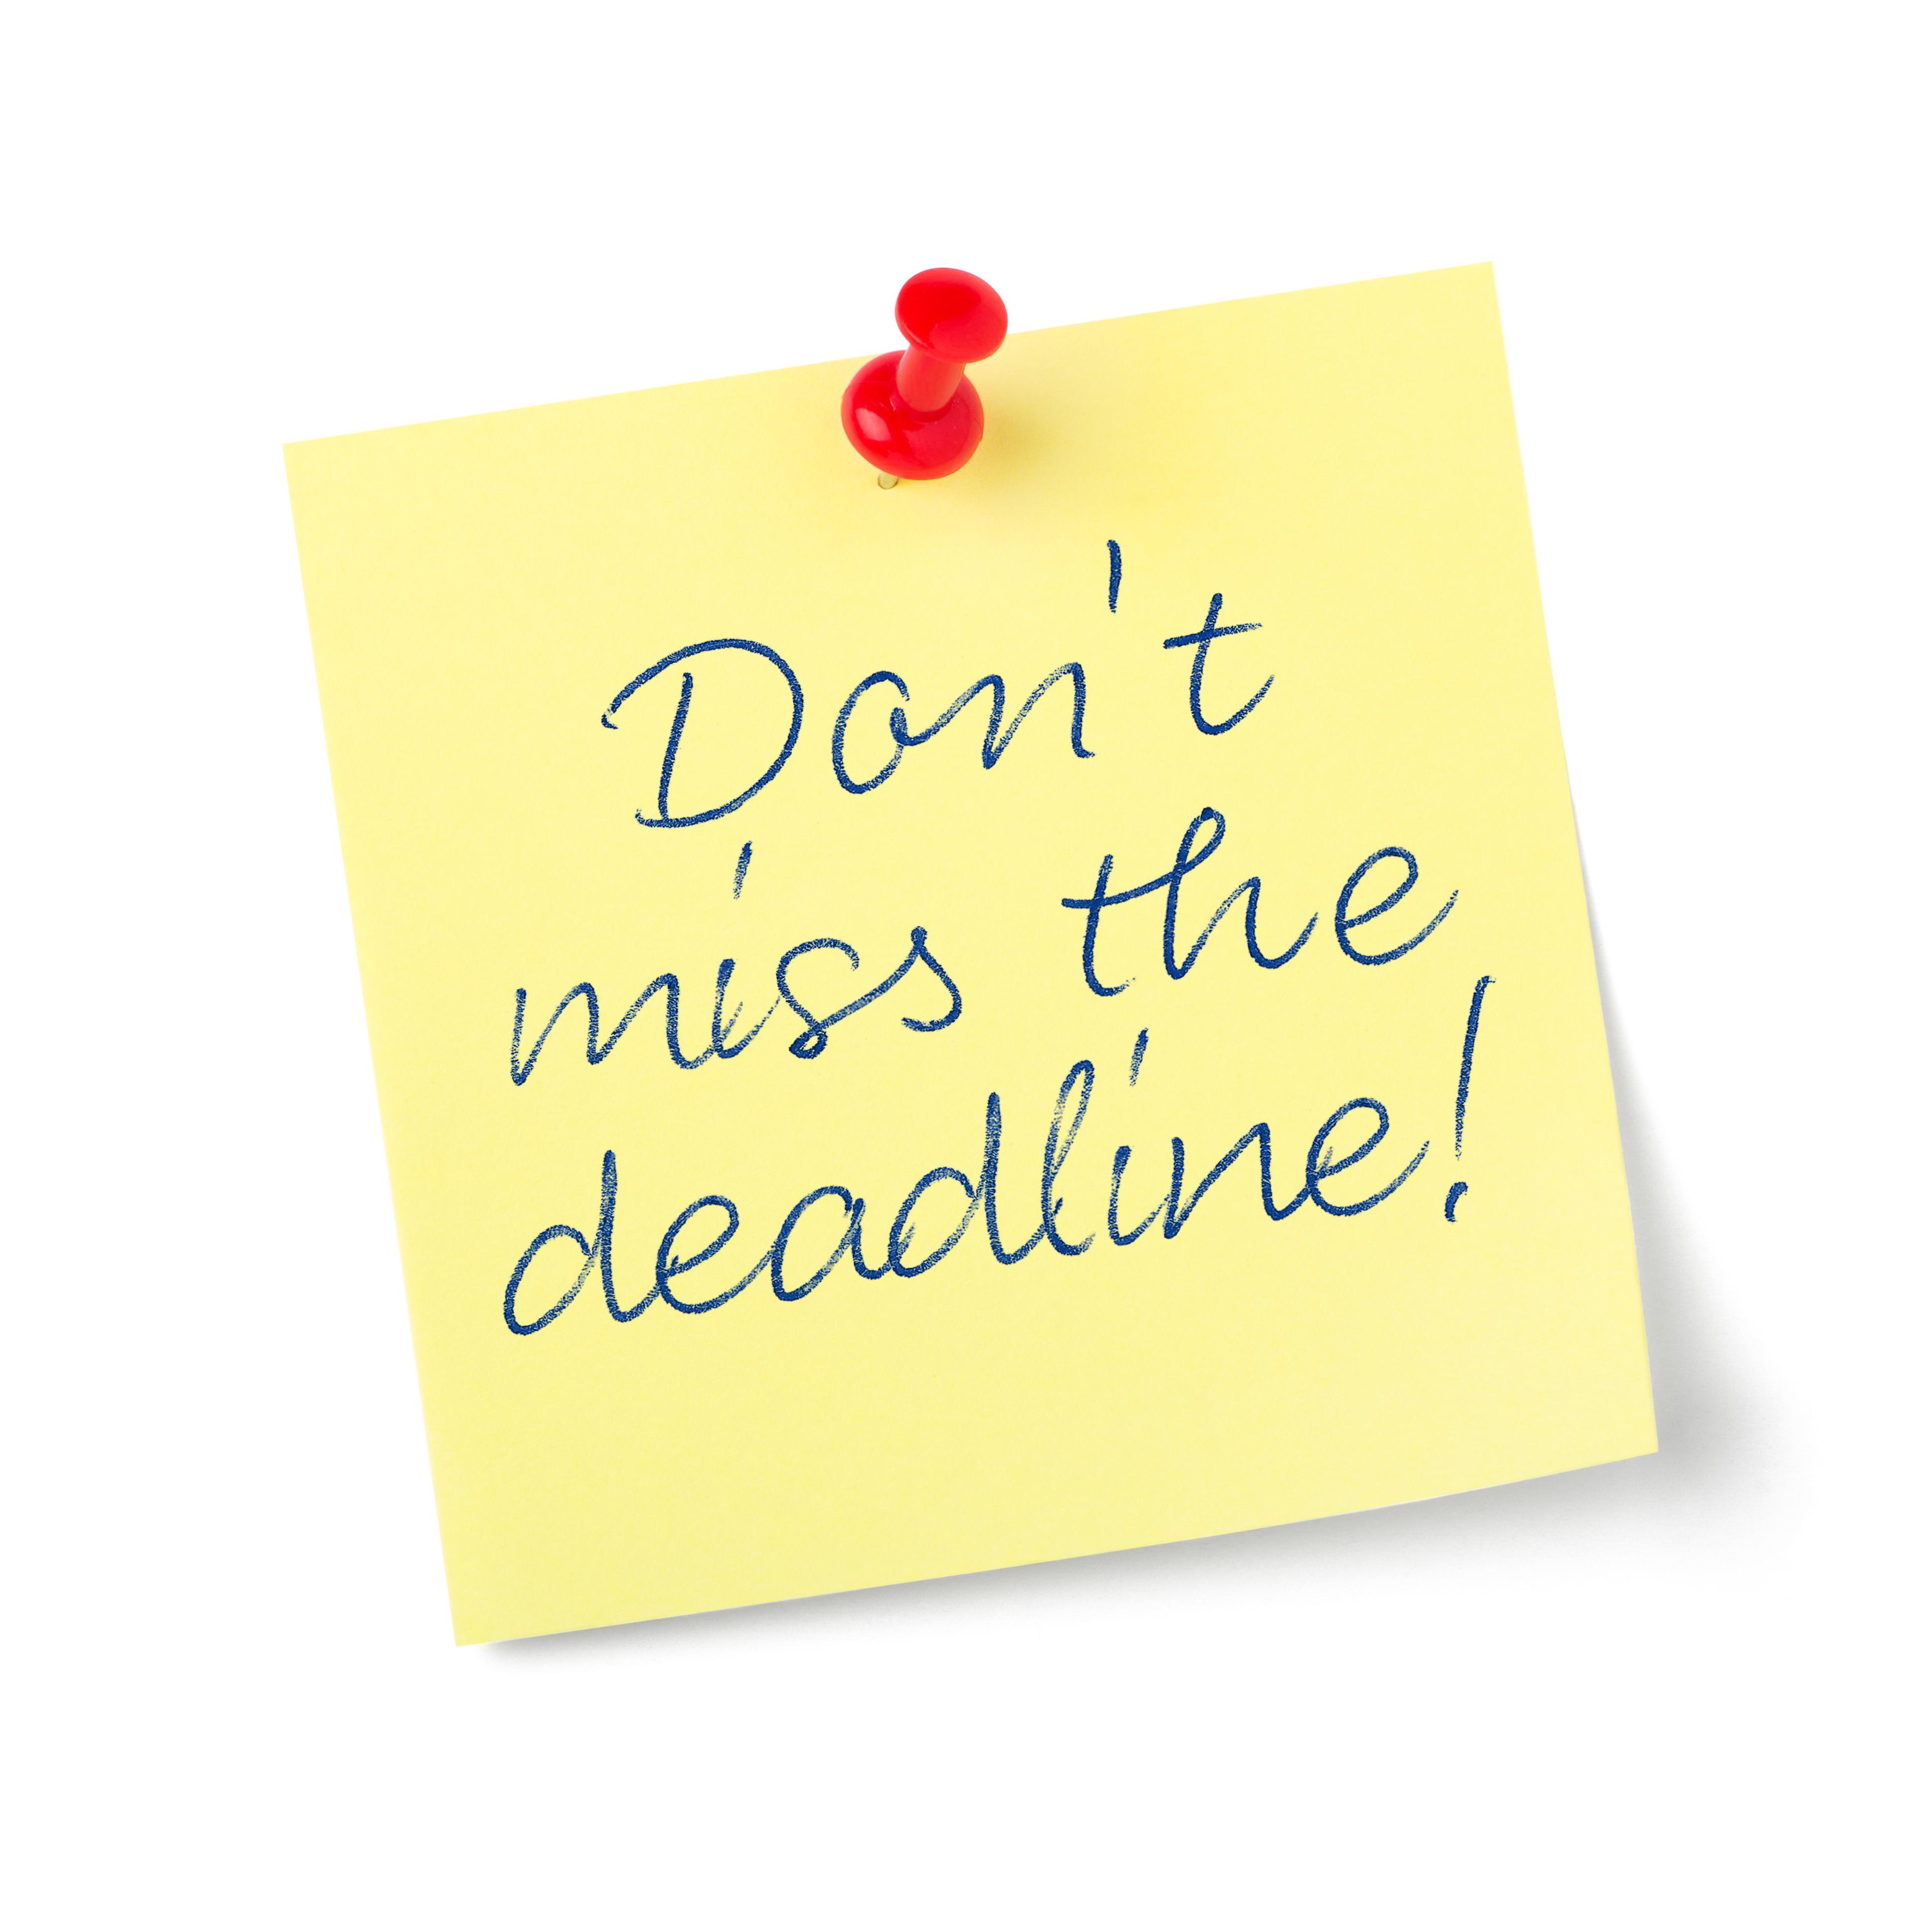 Text on post it note: Don't miss the deadline!